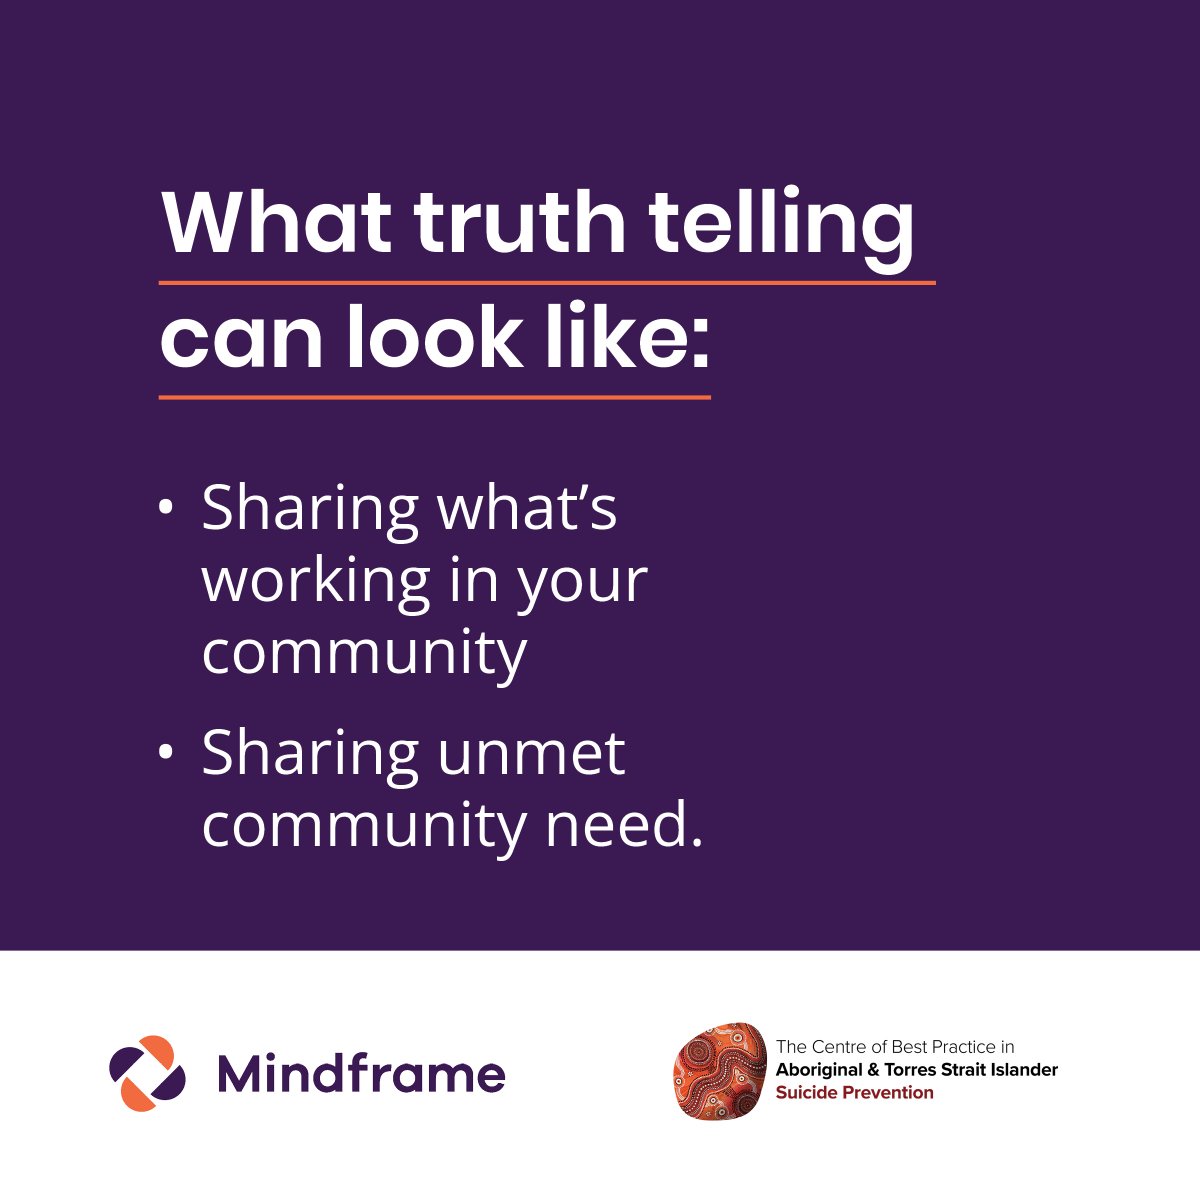 In a collaboration led by @CBPATSISP Everymind has co-developed a First Nations guide for truth-telling about suicide designed to support First Nations people to talk about suicide in a way that is safe for individuals, families and communities. Download: tinyurl.com/yfjhzzmu